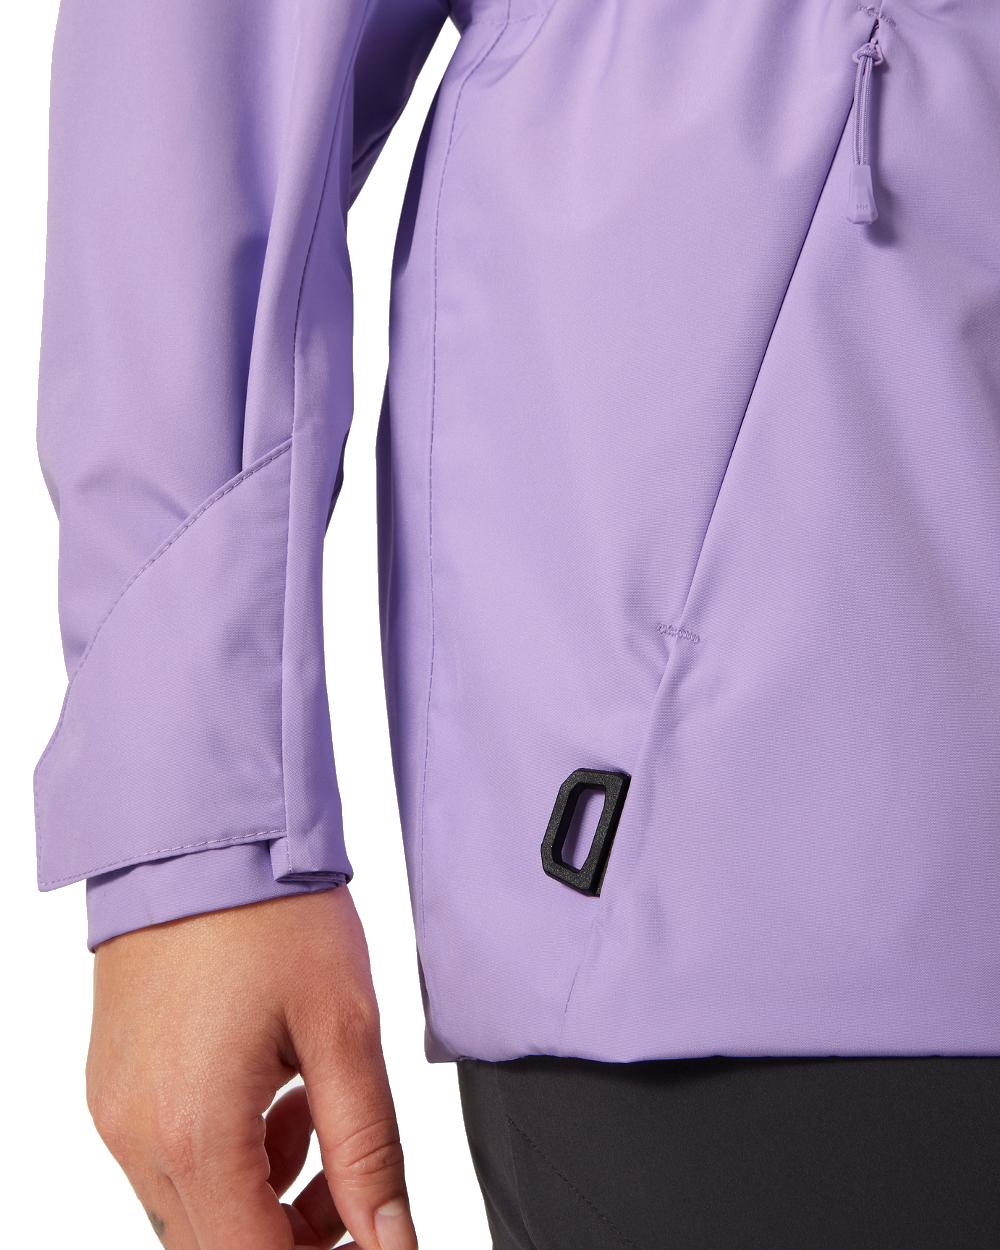 Heather coloured Helly Hansen Womens HP Racing Sailing Jacket 2.0 on white background 